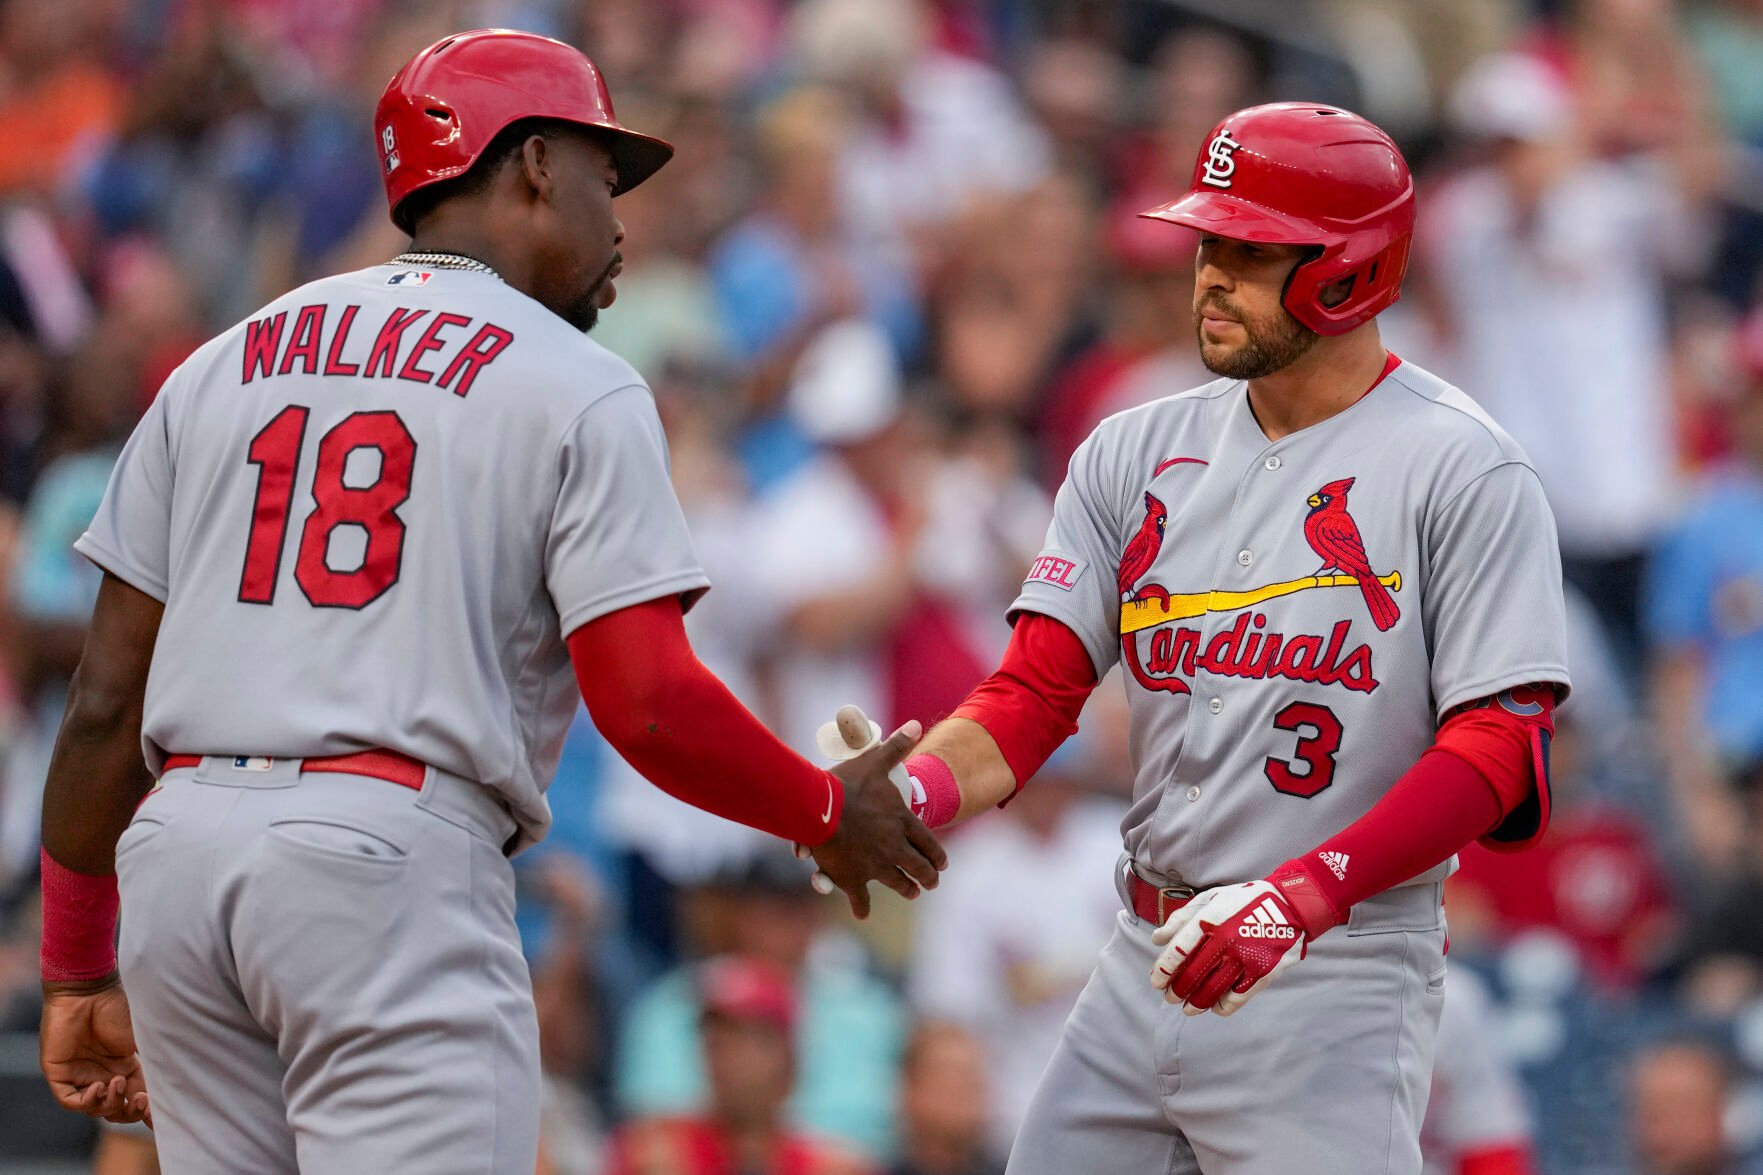 Jordan Montgomery and Dylan Carlson set tone as Cardinals win fourth in a row, 9-3 over Nationals